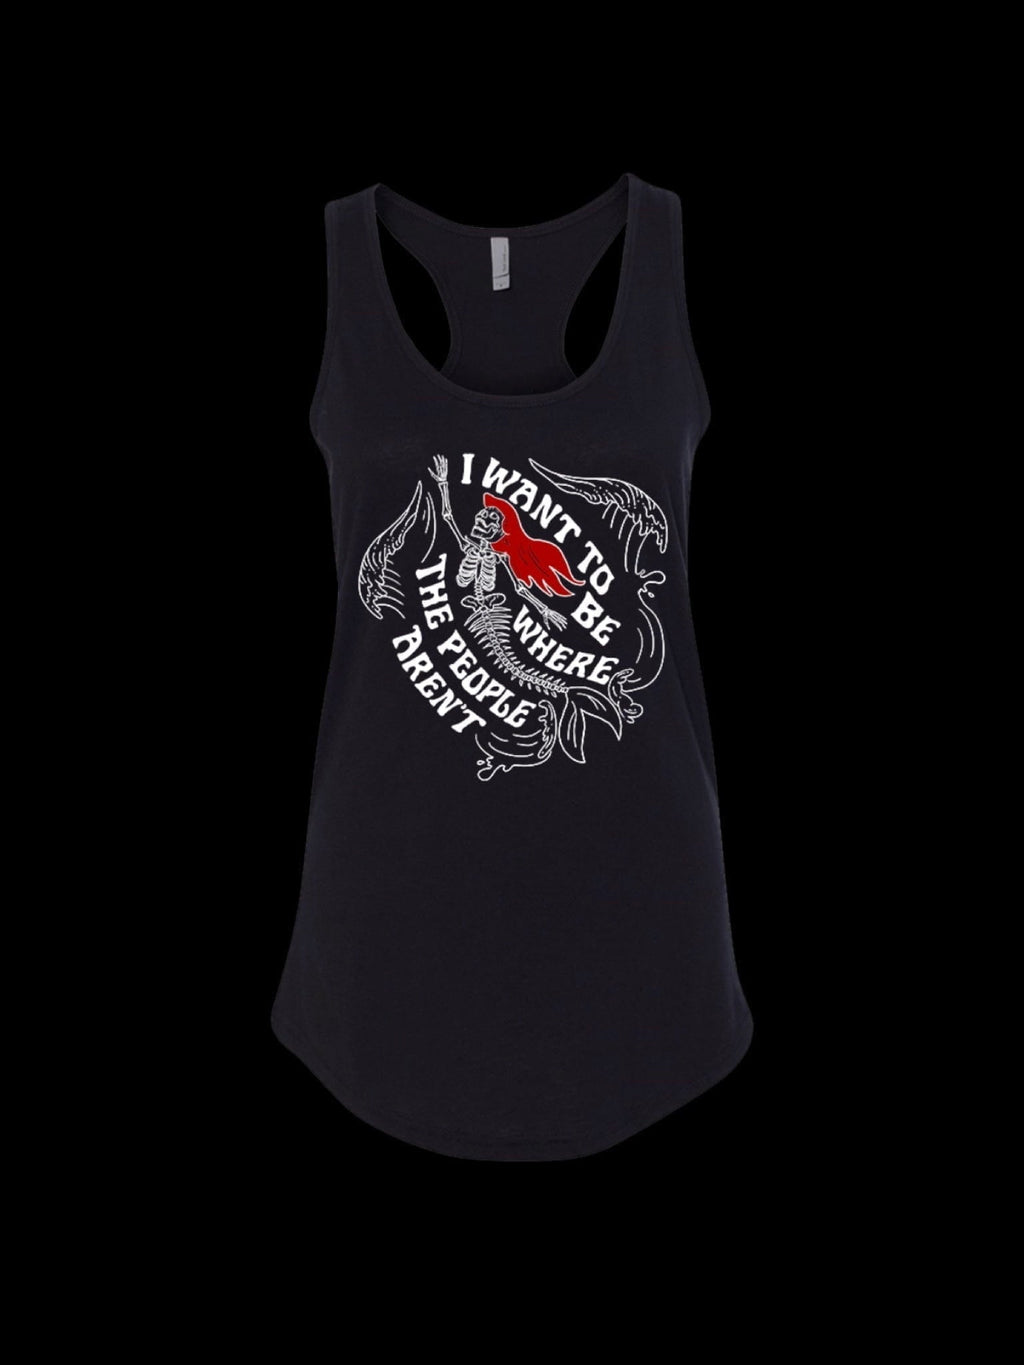 Commandeer Clothing Small Fish Lady Tee, Tank, or Crop